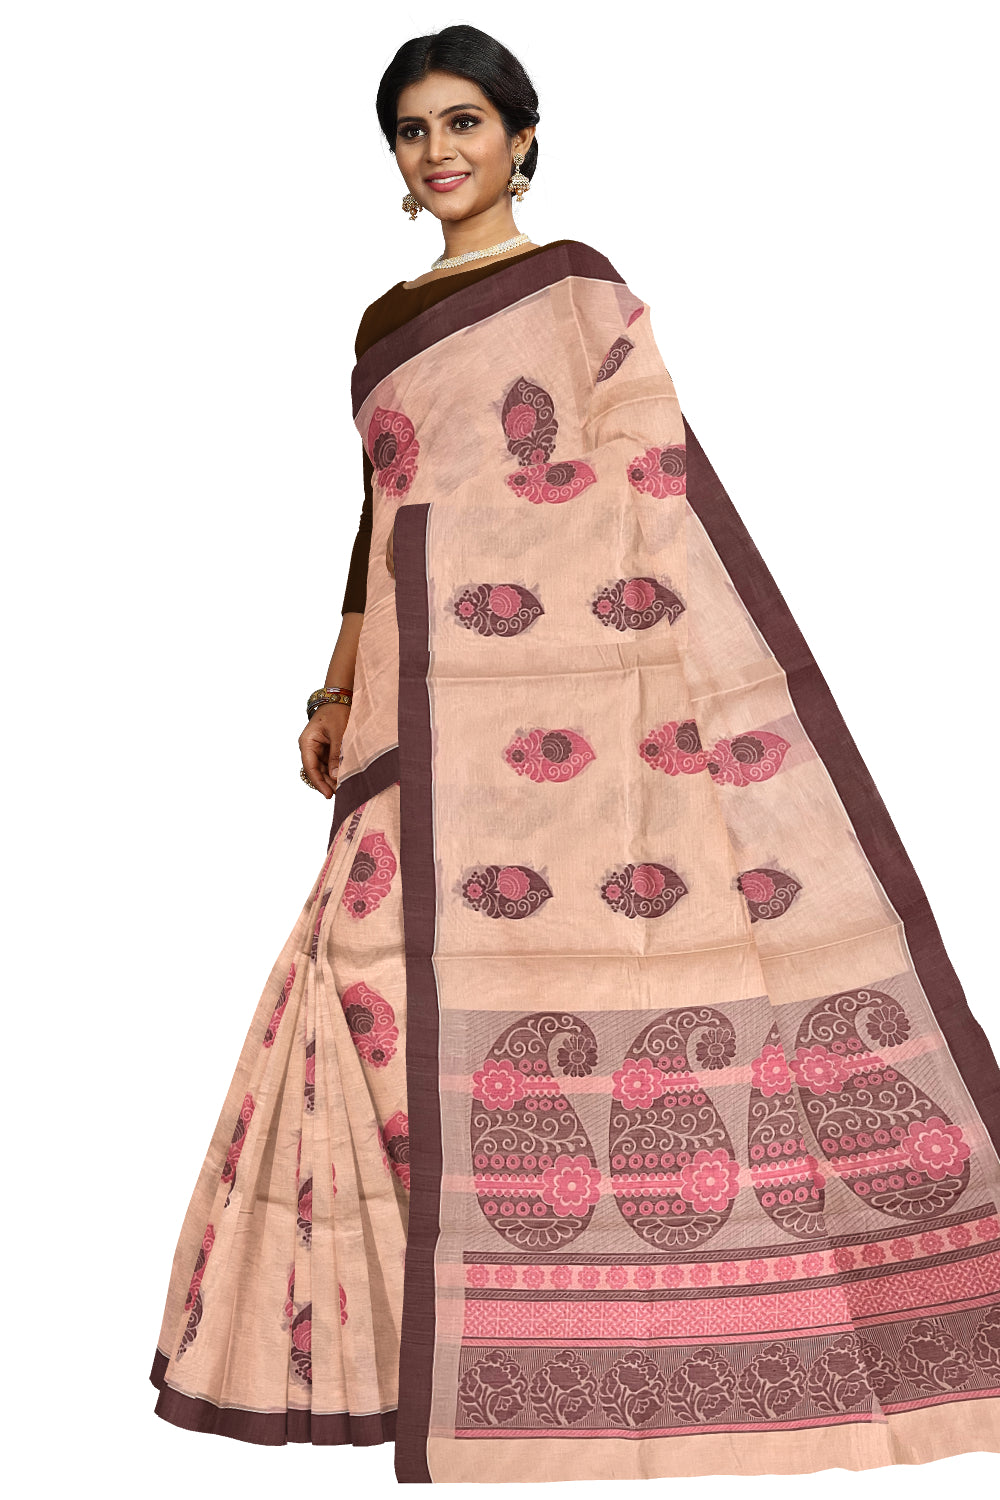 Southloom Brown Cotton Saree with Woven Designs